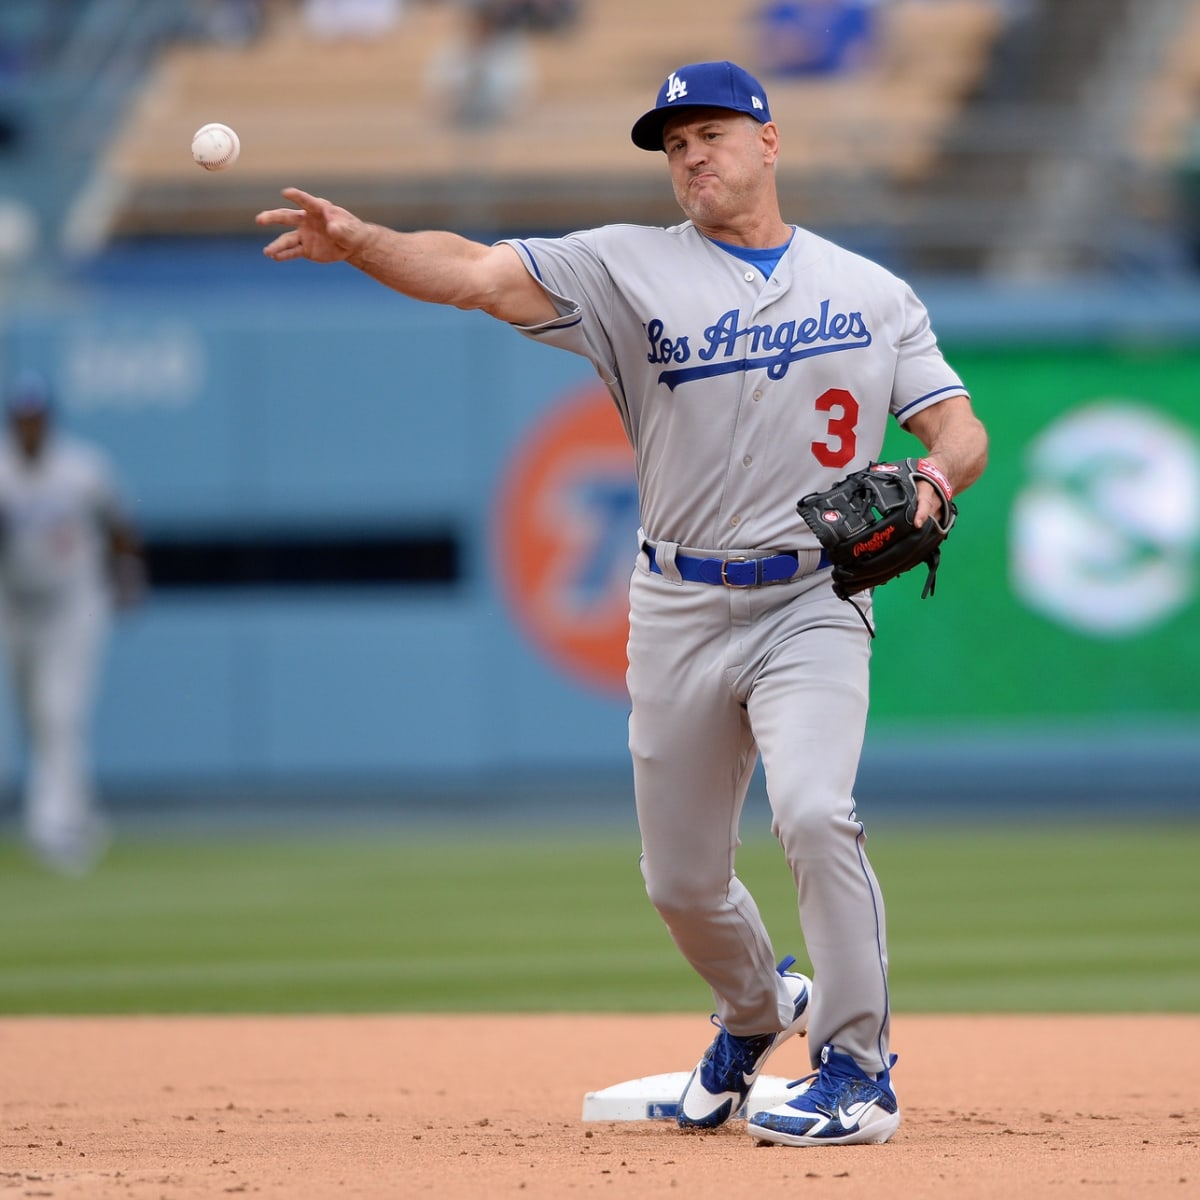 Ranking the Dodgers' Rookies of the Year, Part 1 - Inside the Dodgers